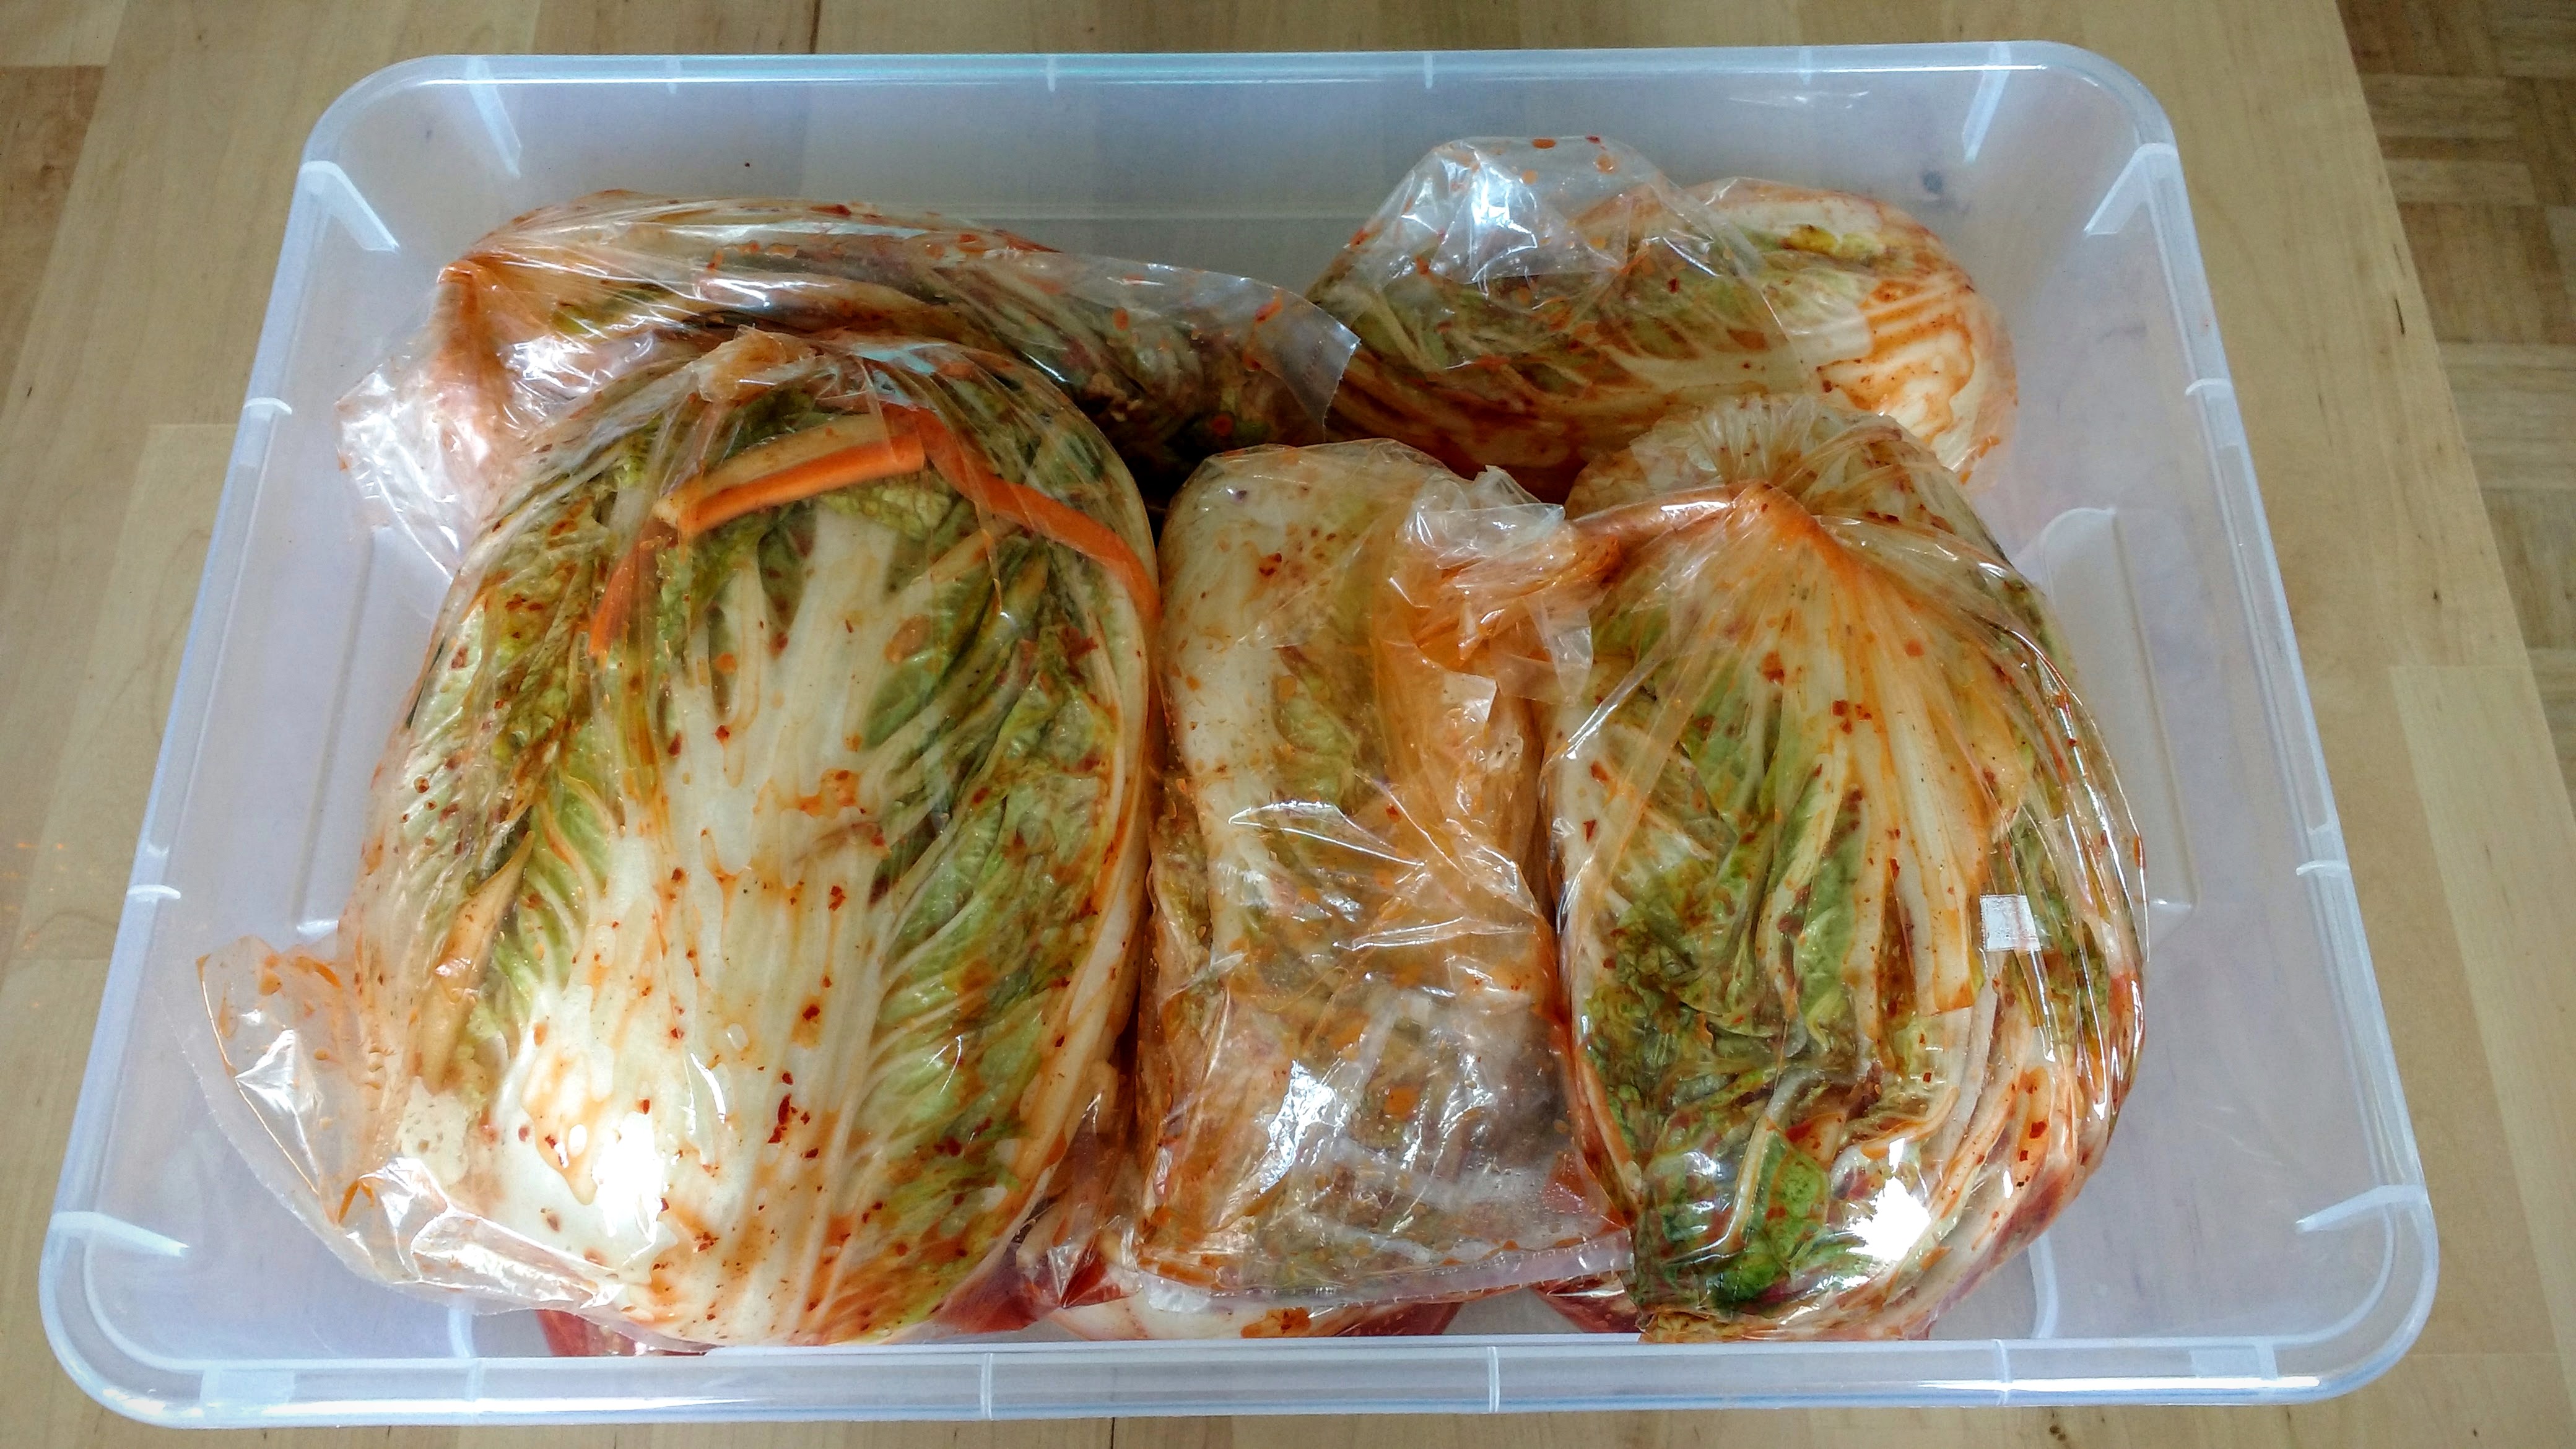 Kimchi - Packed and Organized